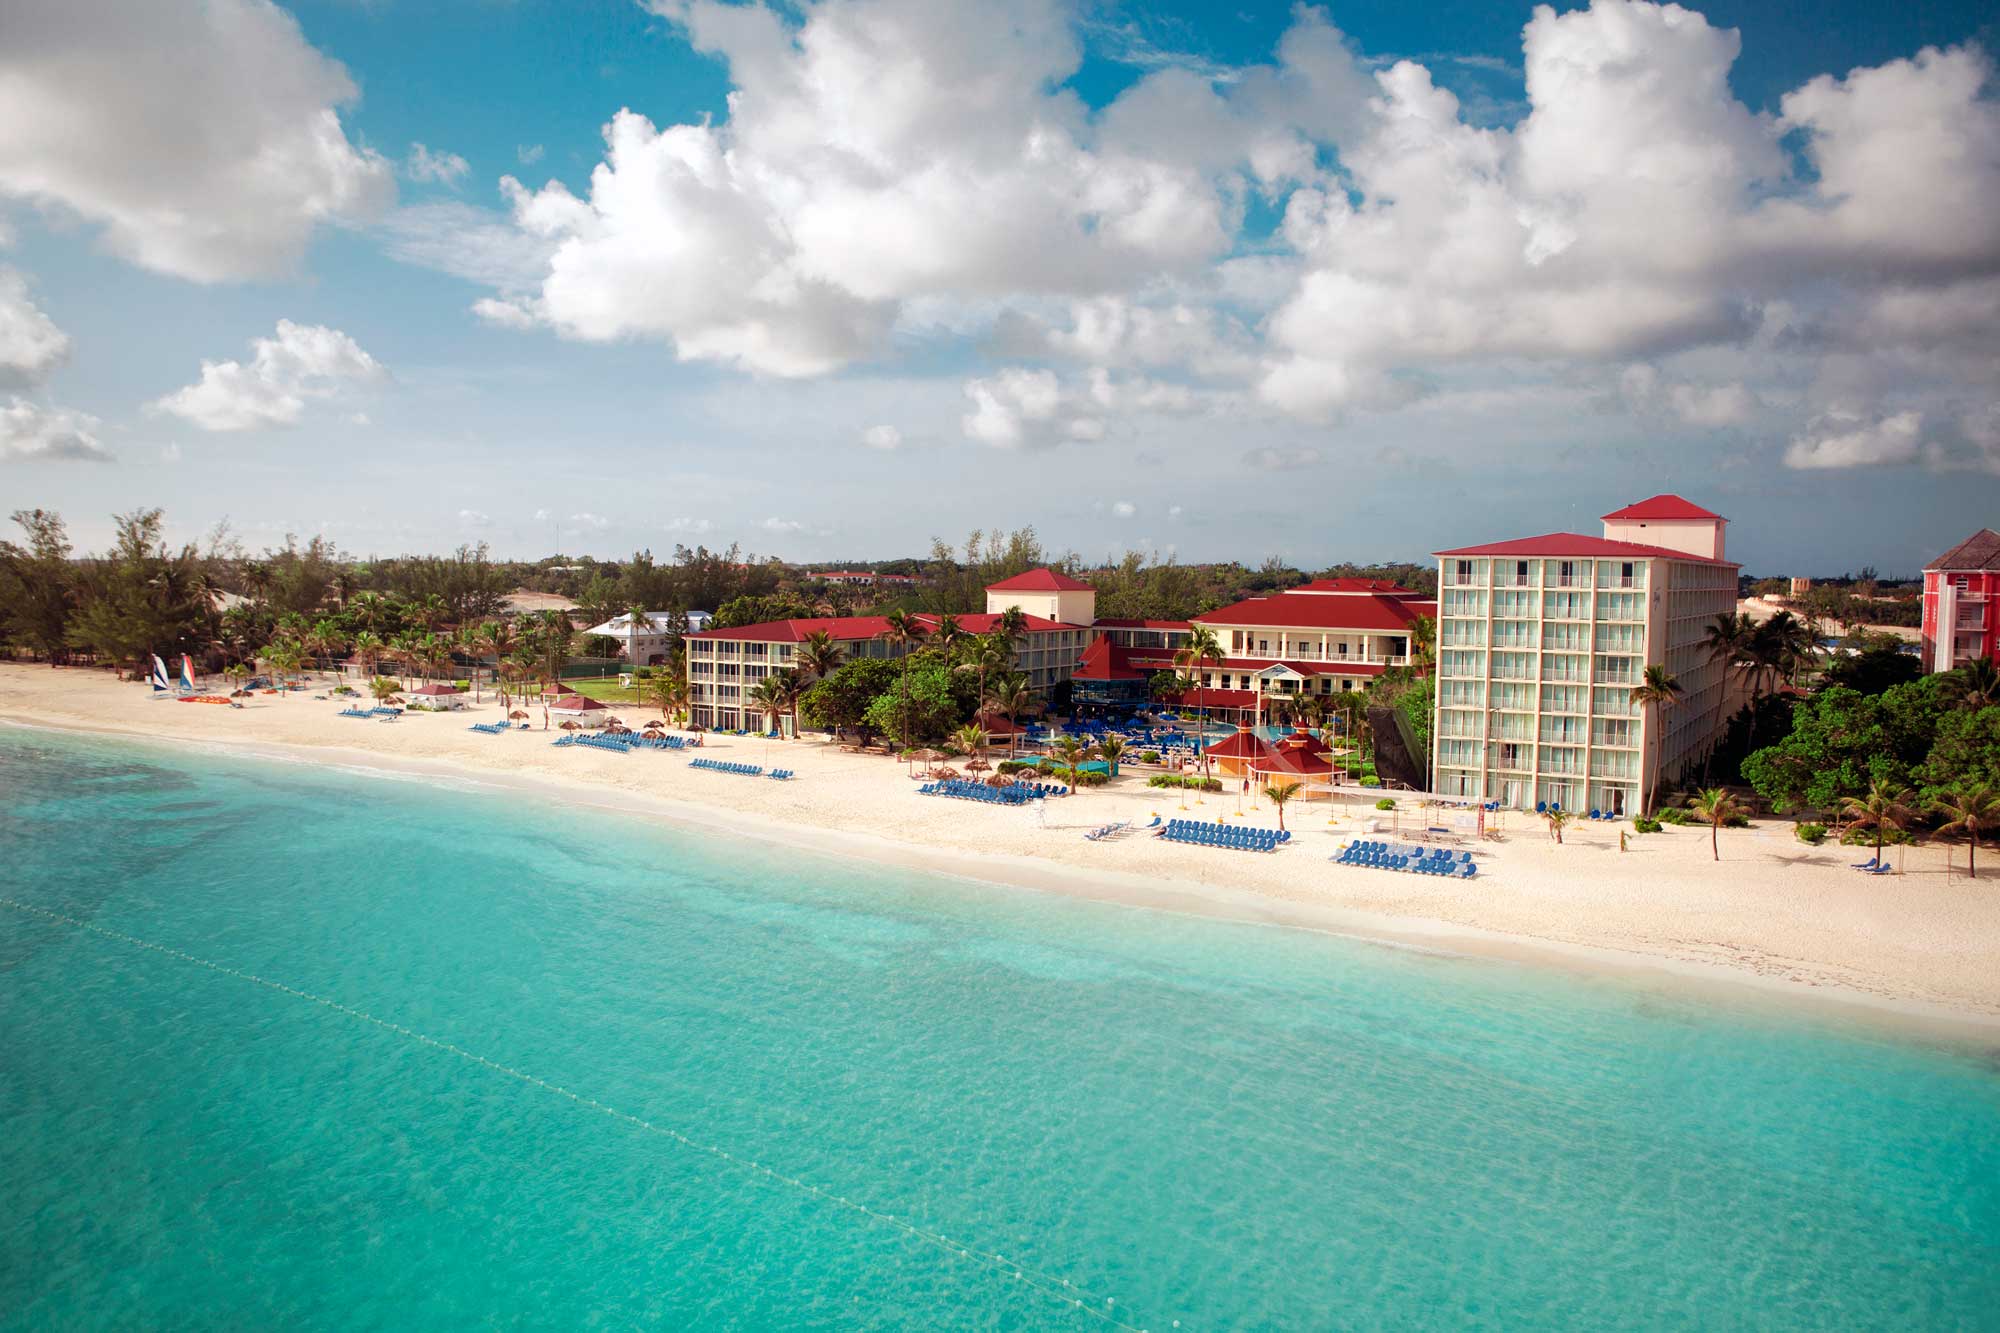 Best Caribbean All-Inclusive Resorts | All-Inclusive Weddings And Honeymoons | Breezes Resort & Spa, Bahamas